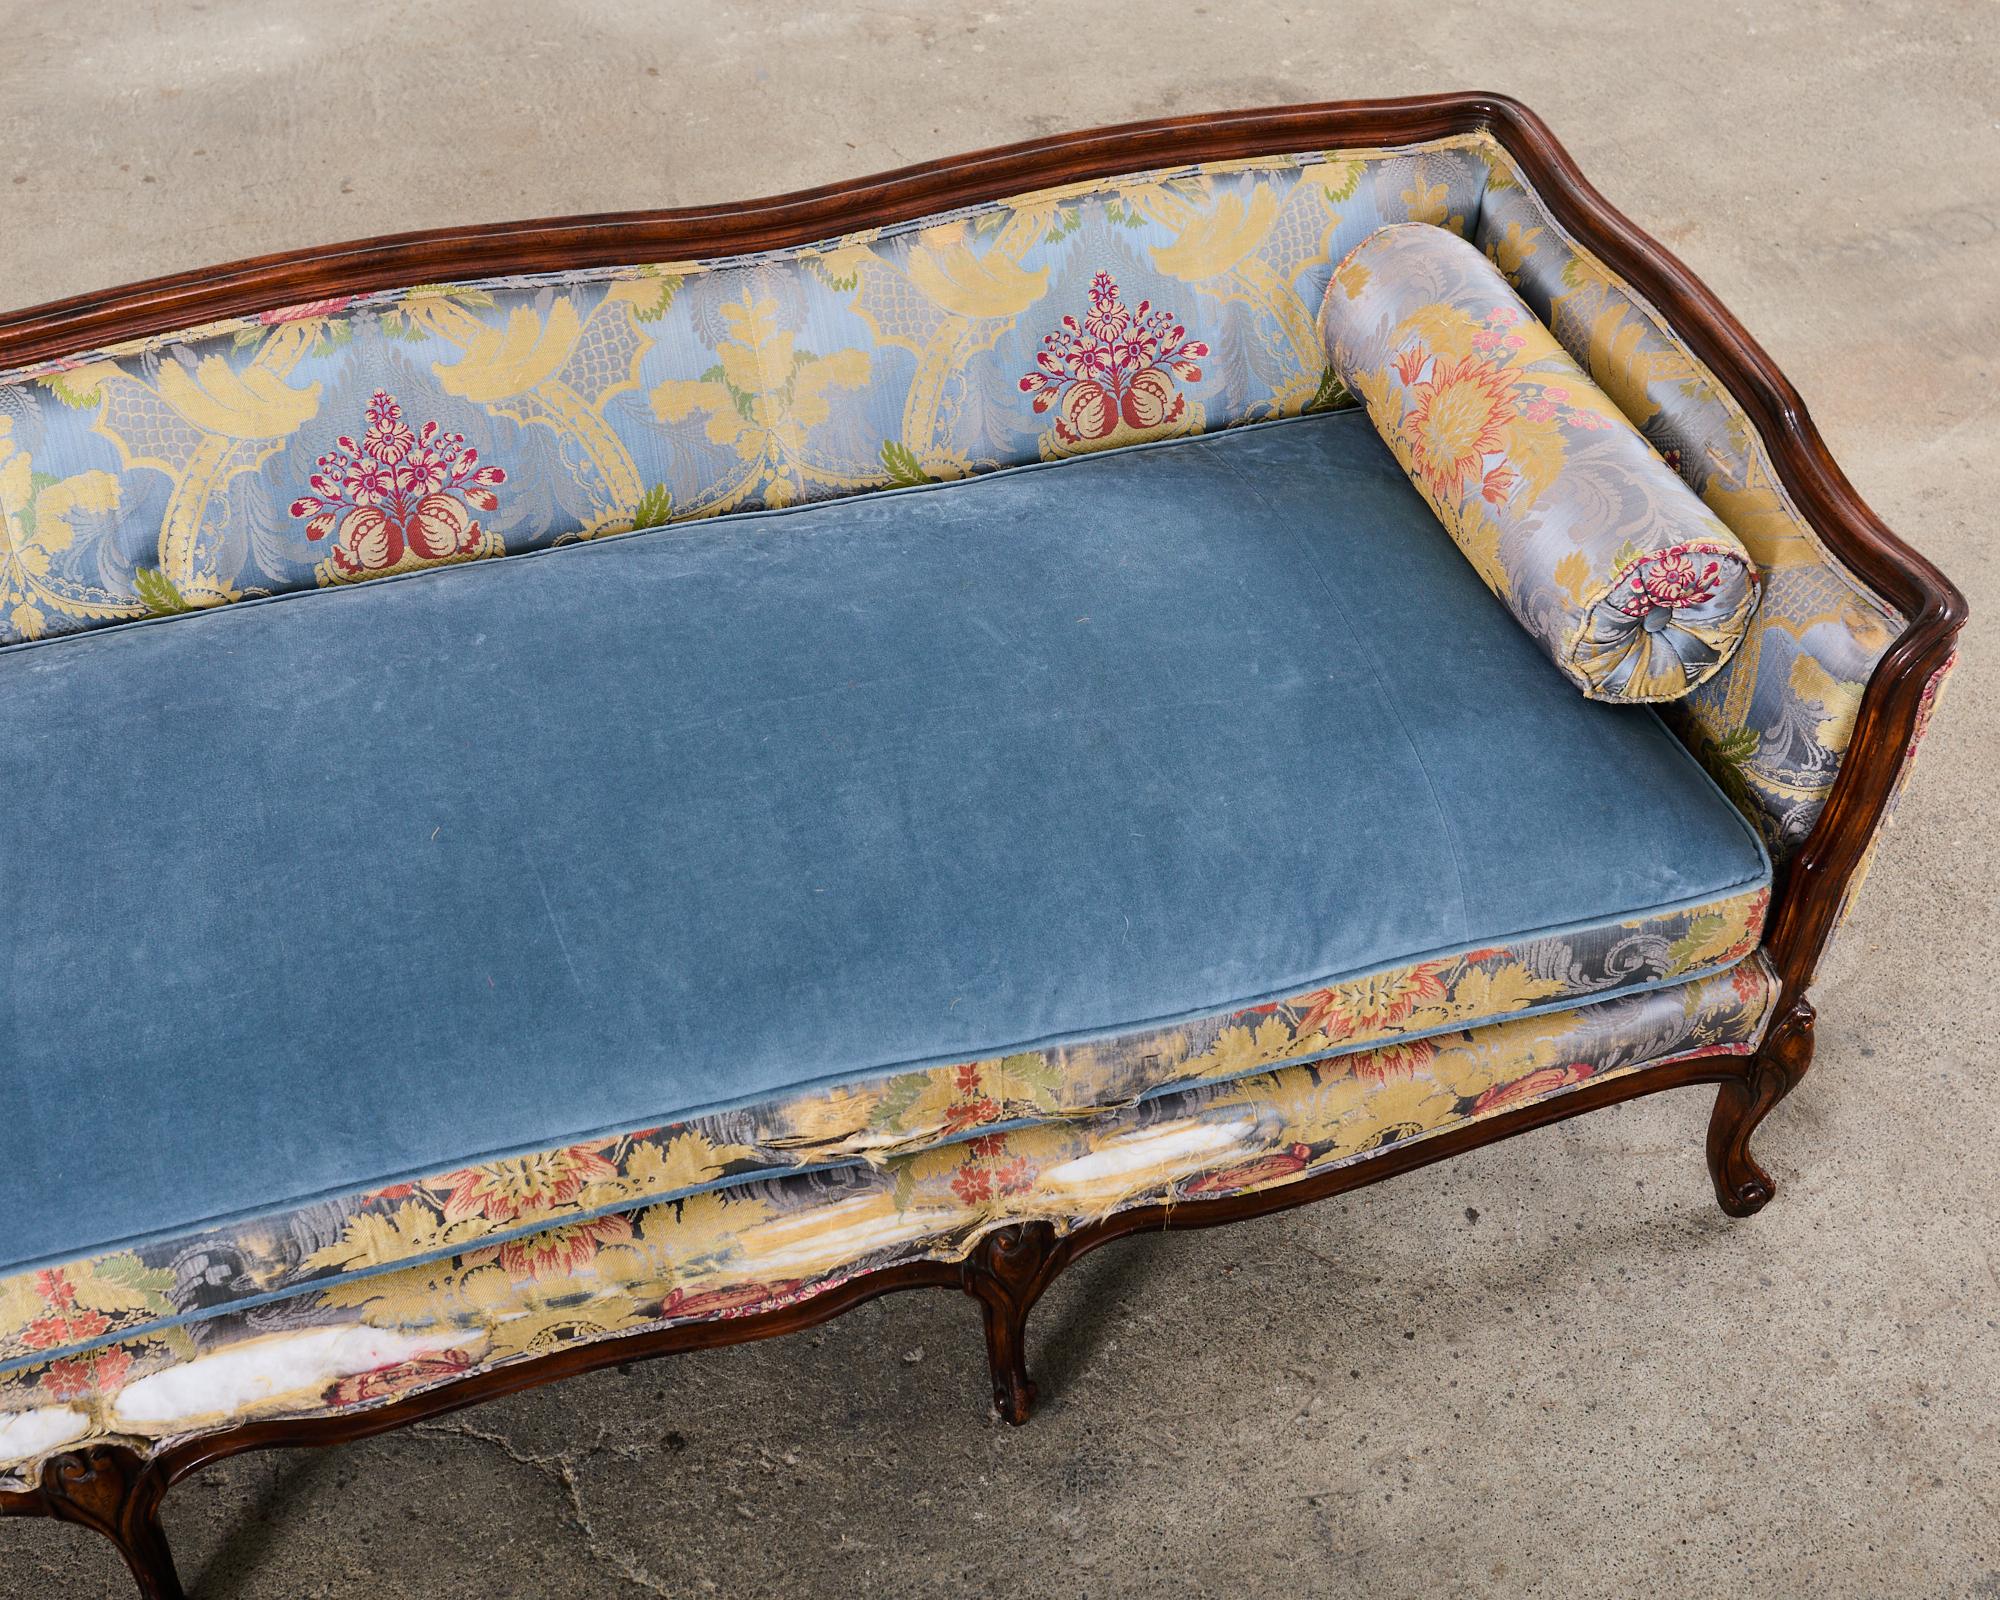 French Provincial Louis XV Style Serpentine Canape Sofa Settee For Sale 2